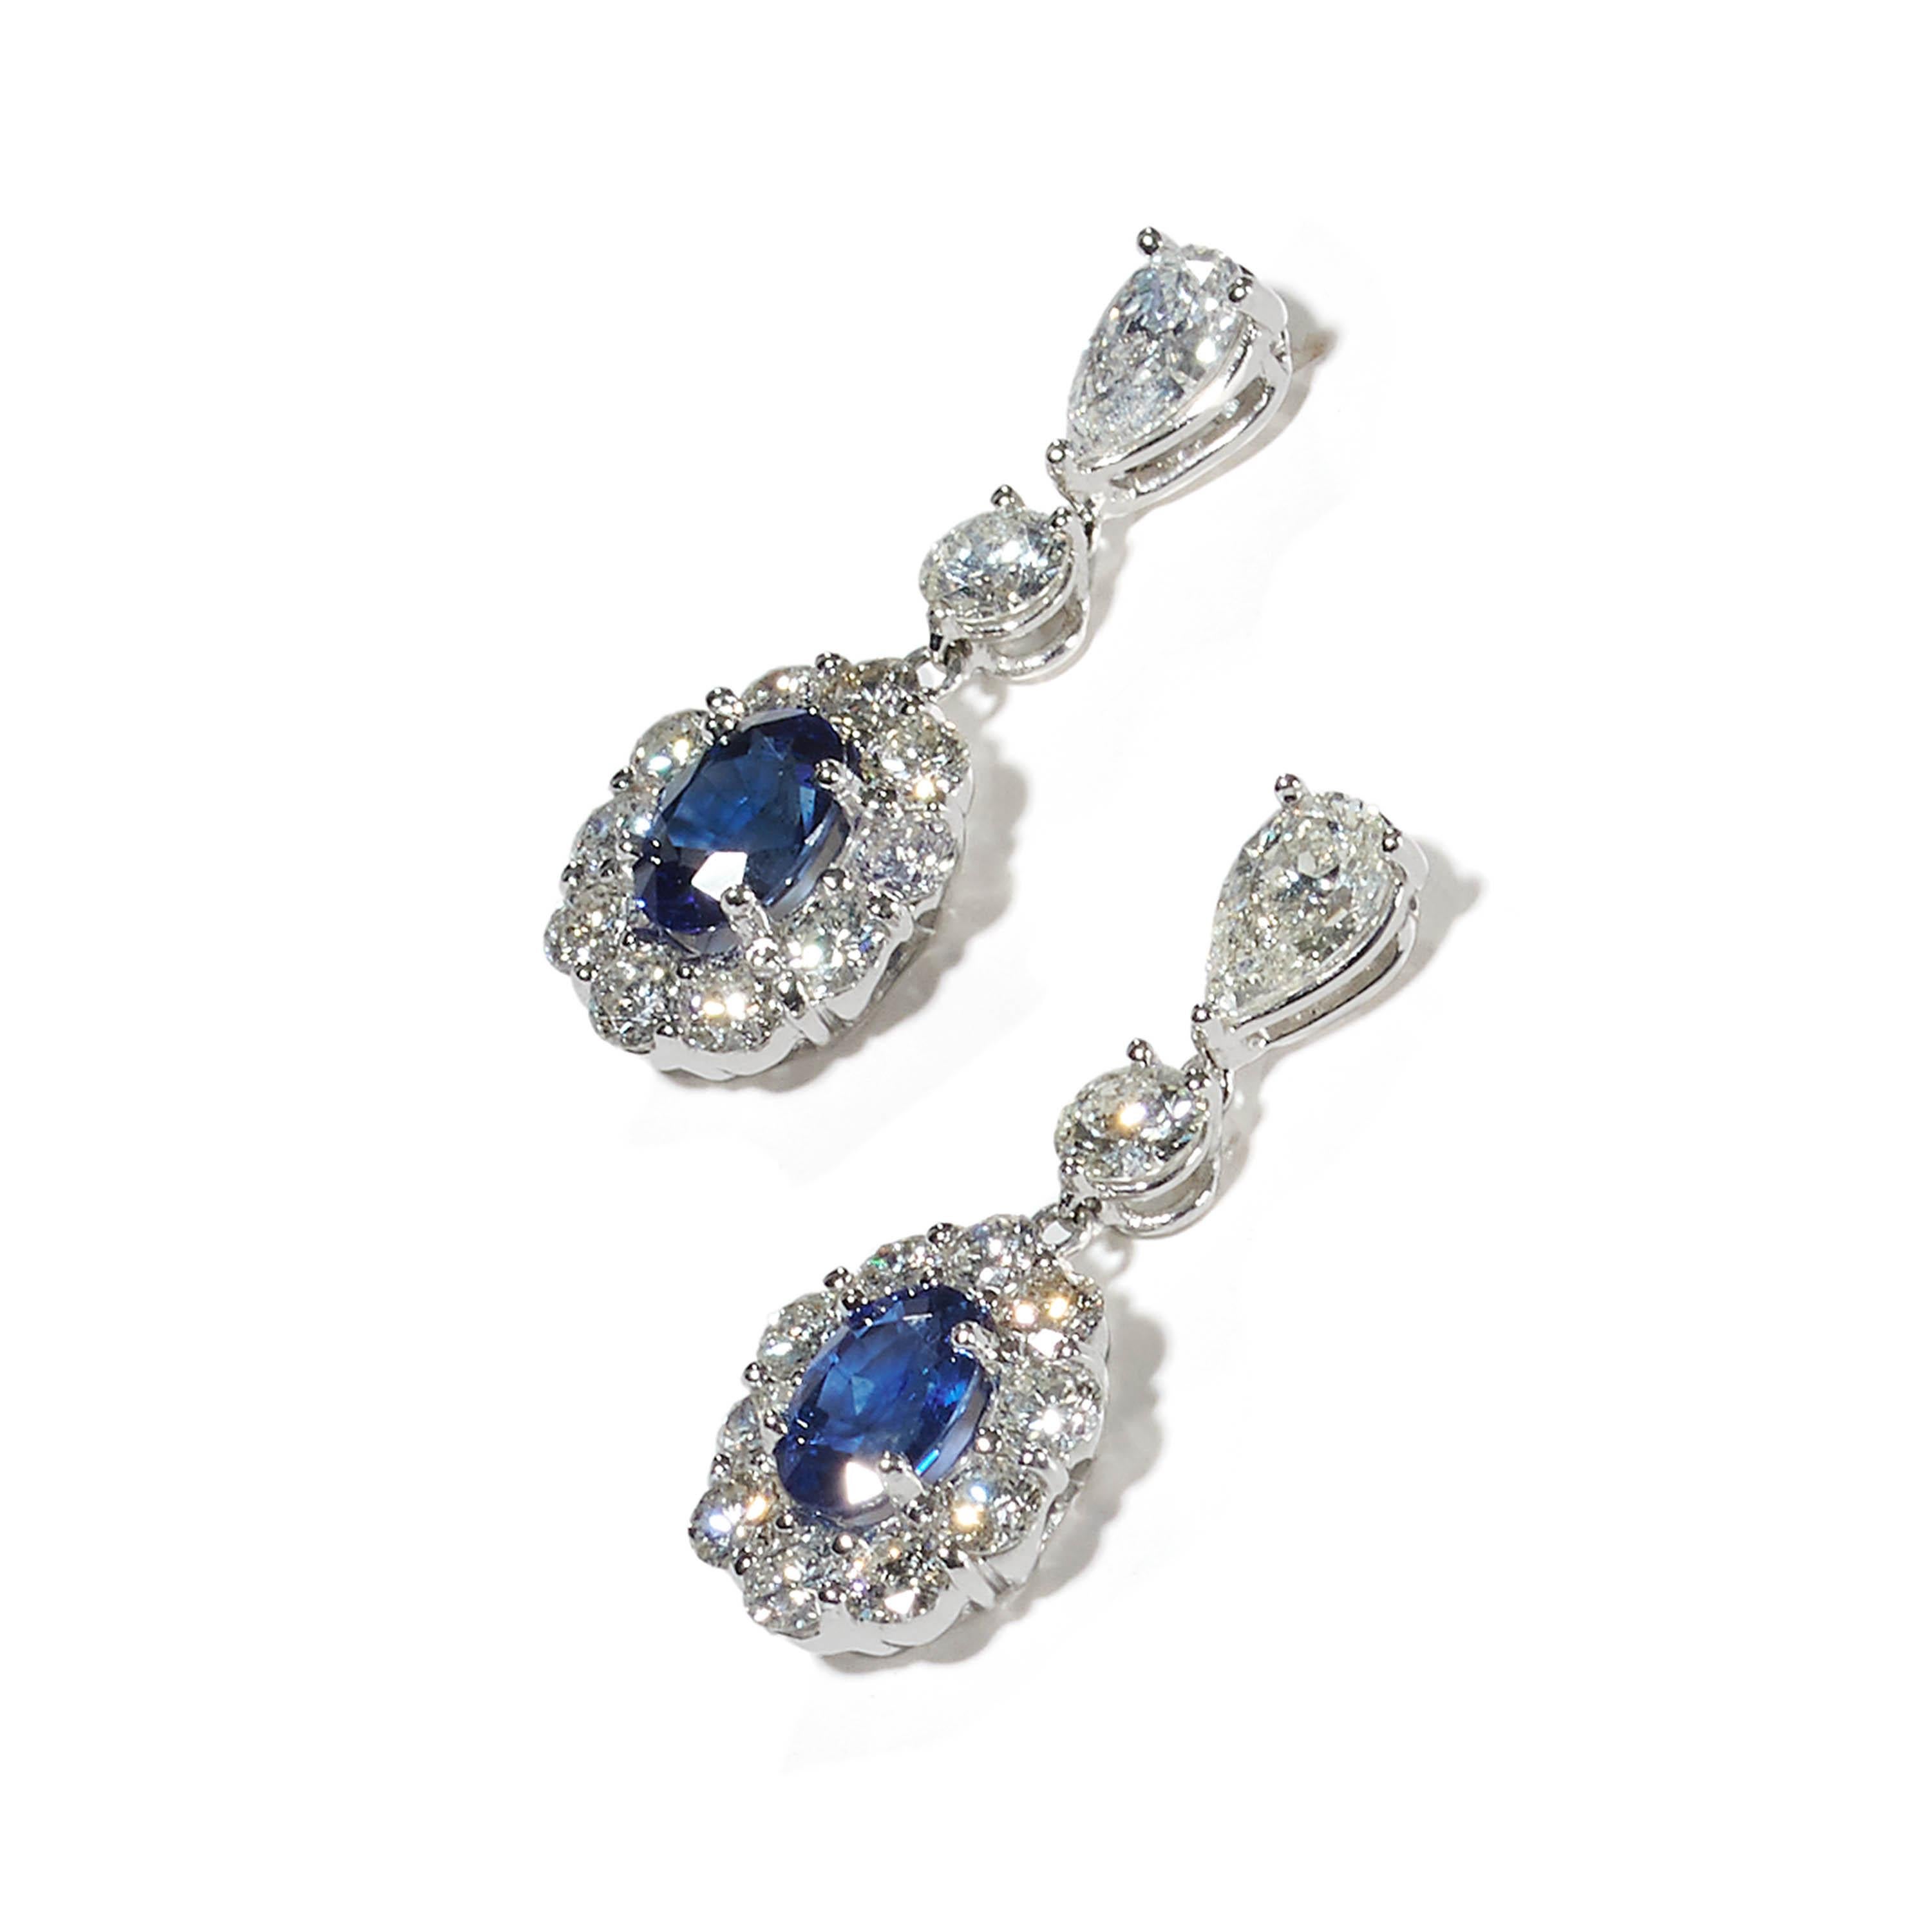 A pair of modern sapphire and diamond cluster drop earrings, each set with a pear shape diamond in the top, suspending a round brilliant-cut diamond, connecting a cluster of round brilliant-cut diamonds, with an oval faceted sapphire, in the centre,